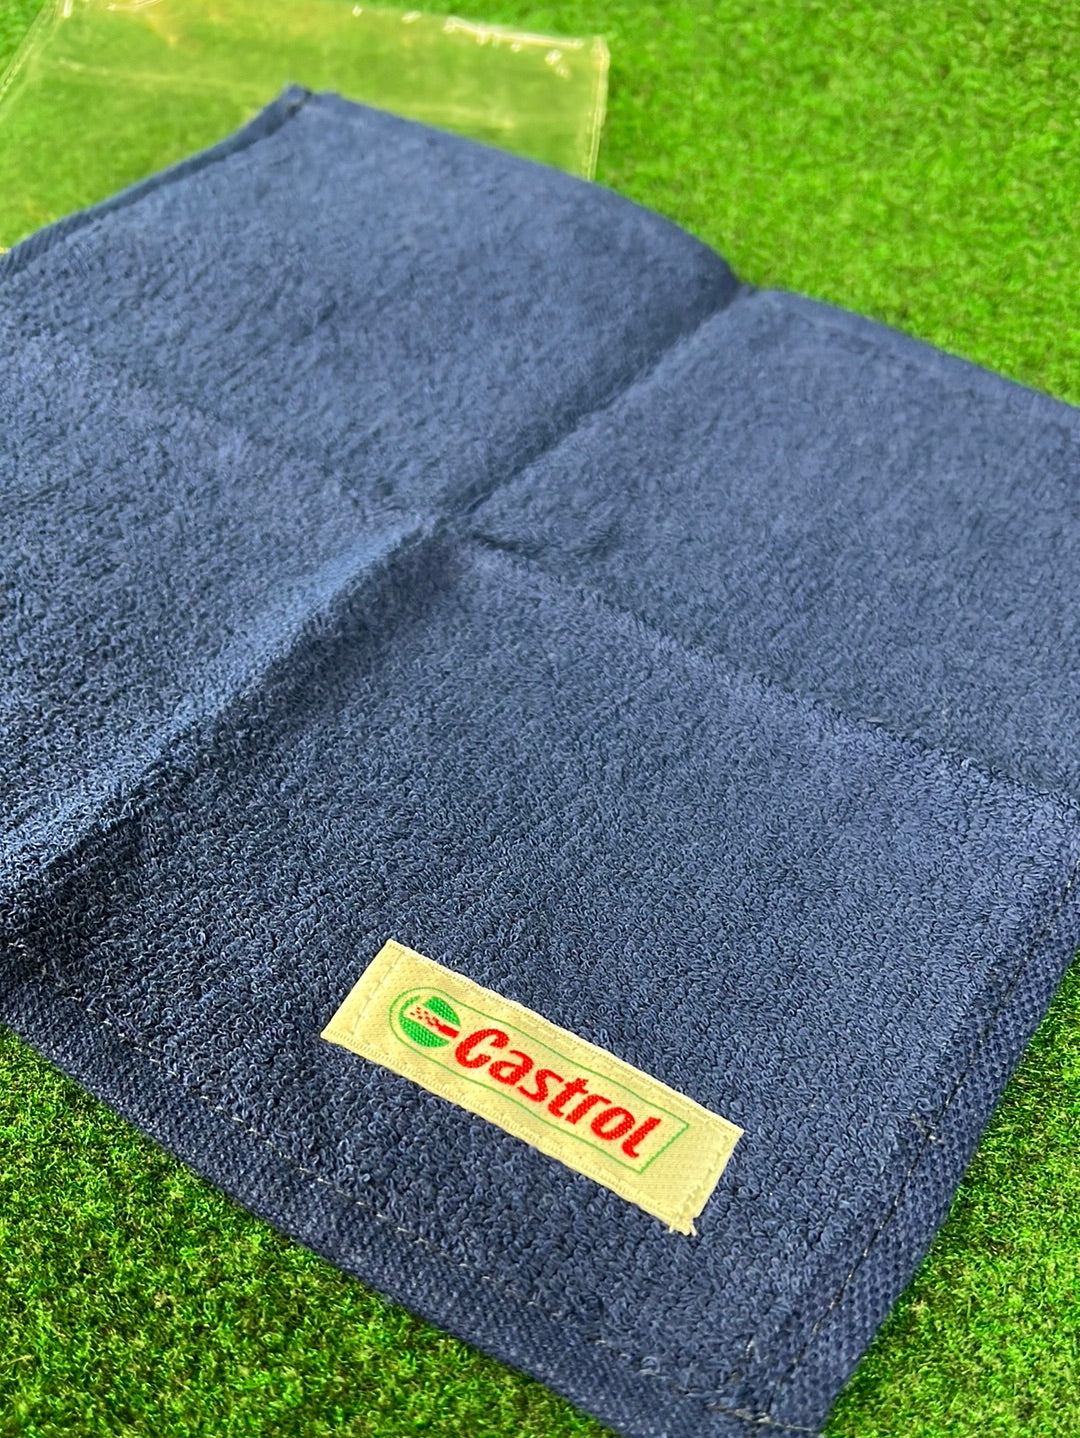 Castrol - Small Promotional Hand Towel & Mouse Pad Set